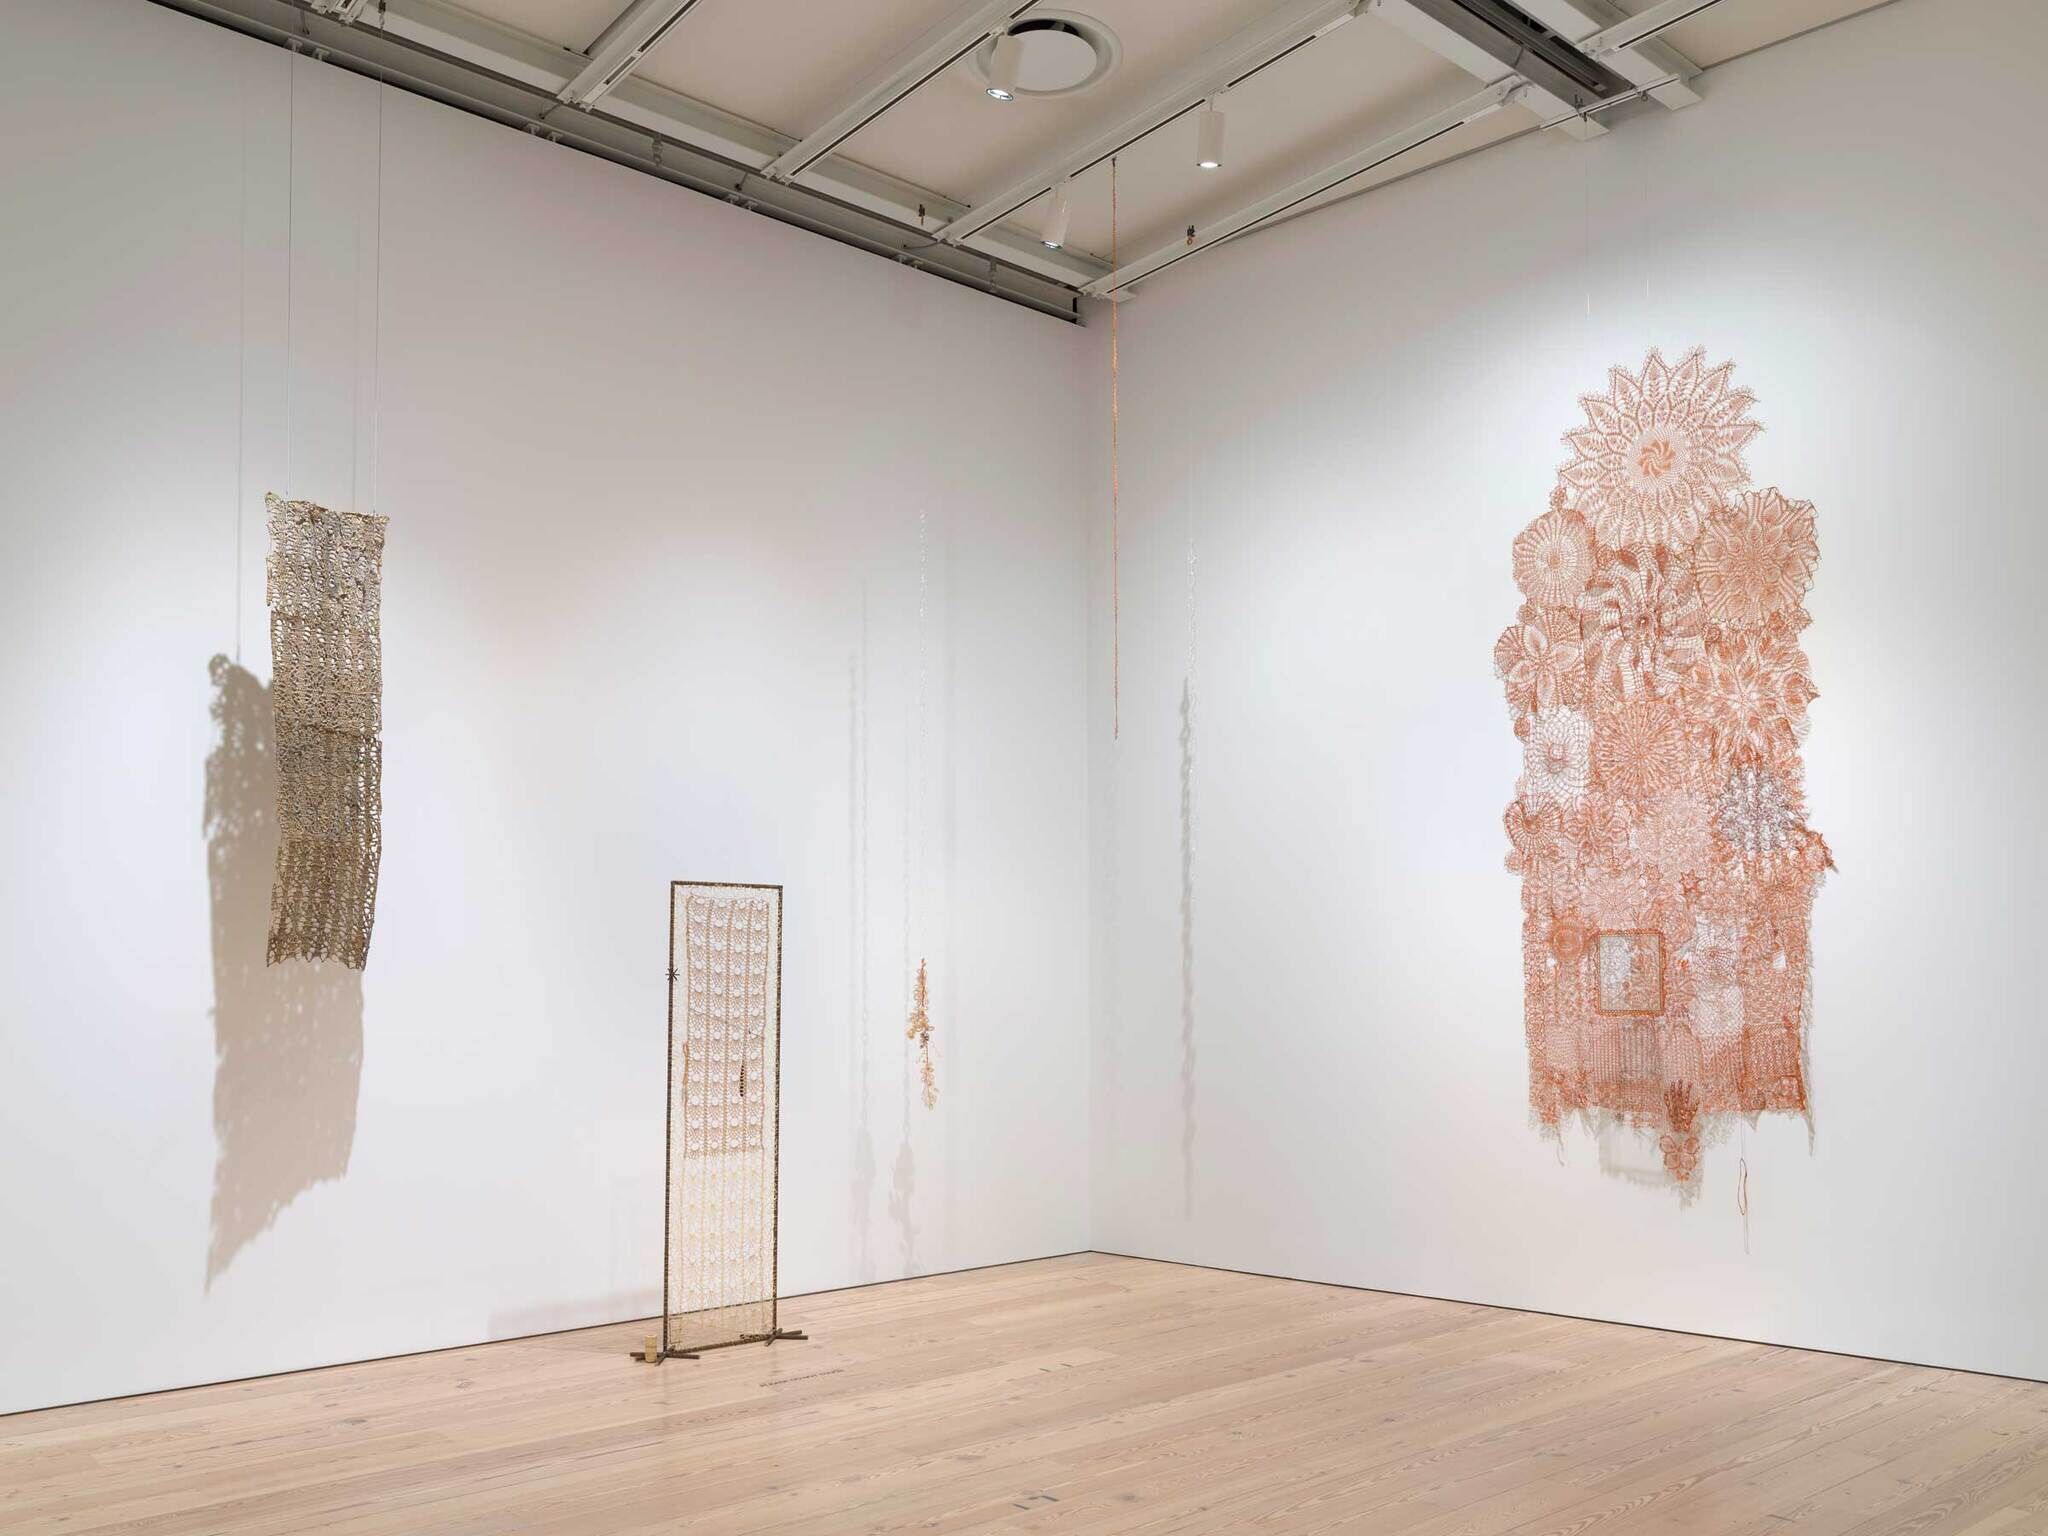 Intricate lace-like textile art pieces displayed in a bright gallery space, hanging from the ceiling and standing on the floor.